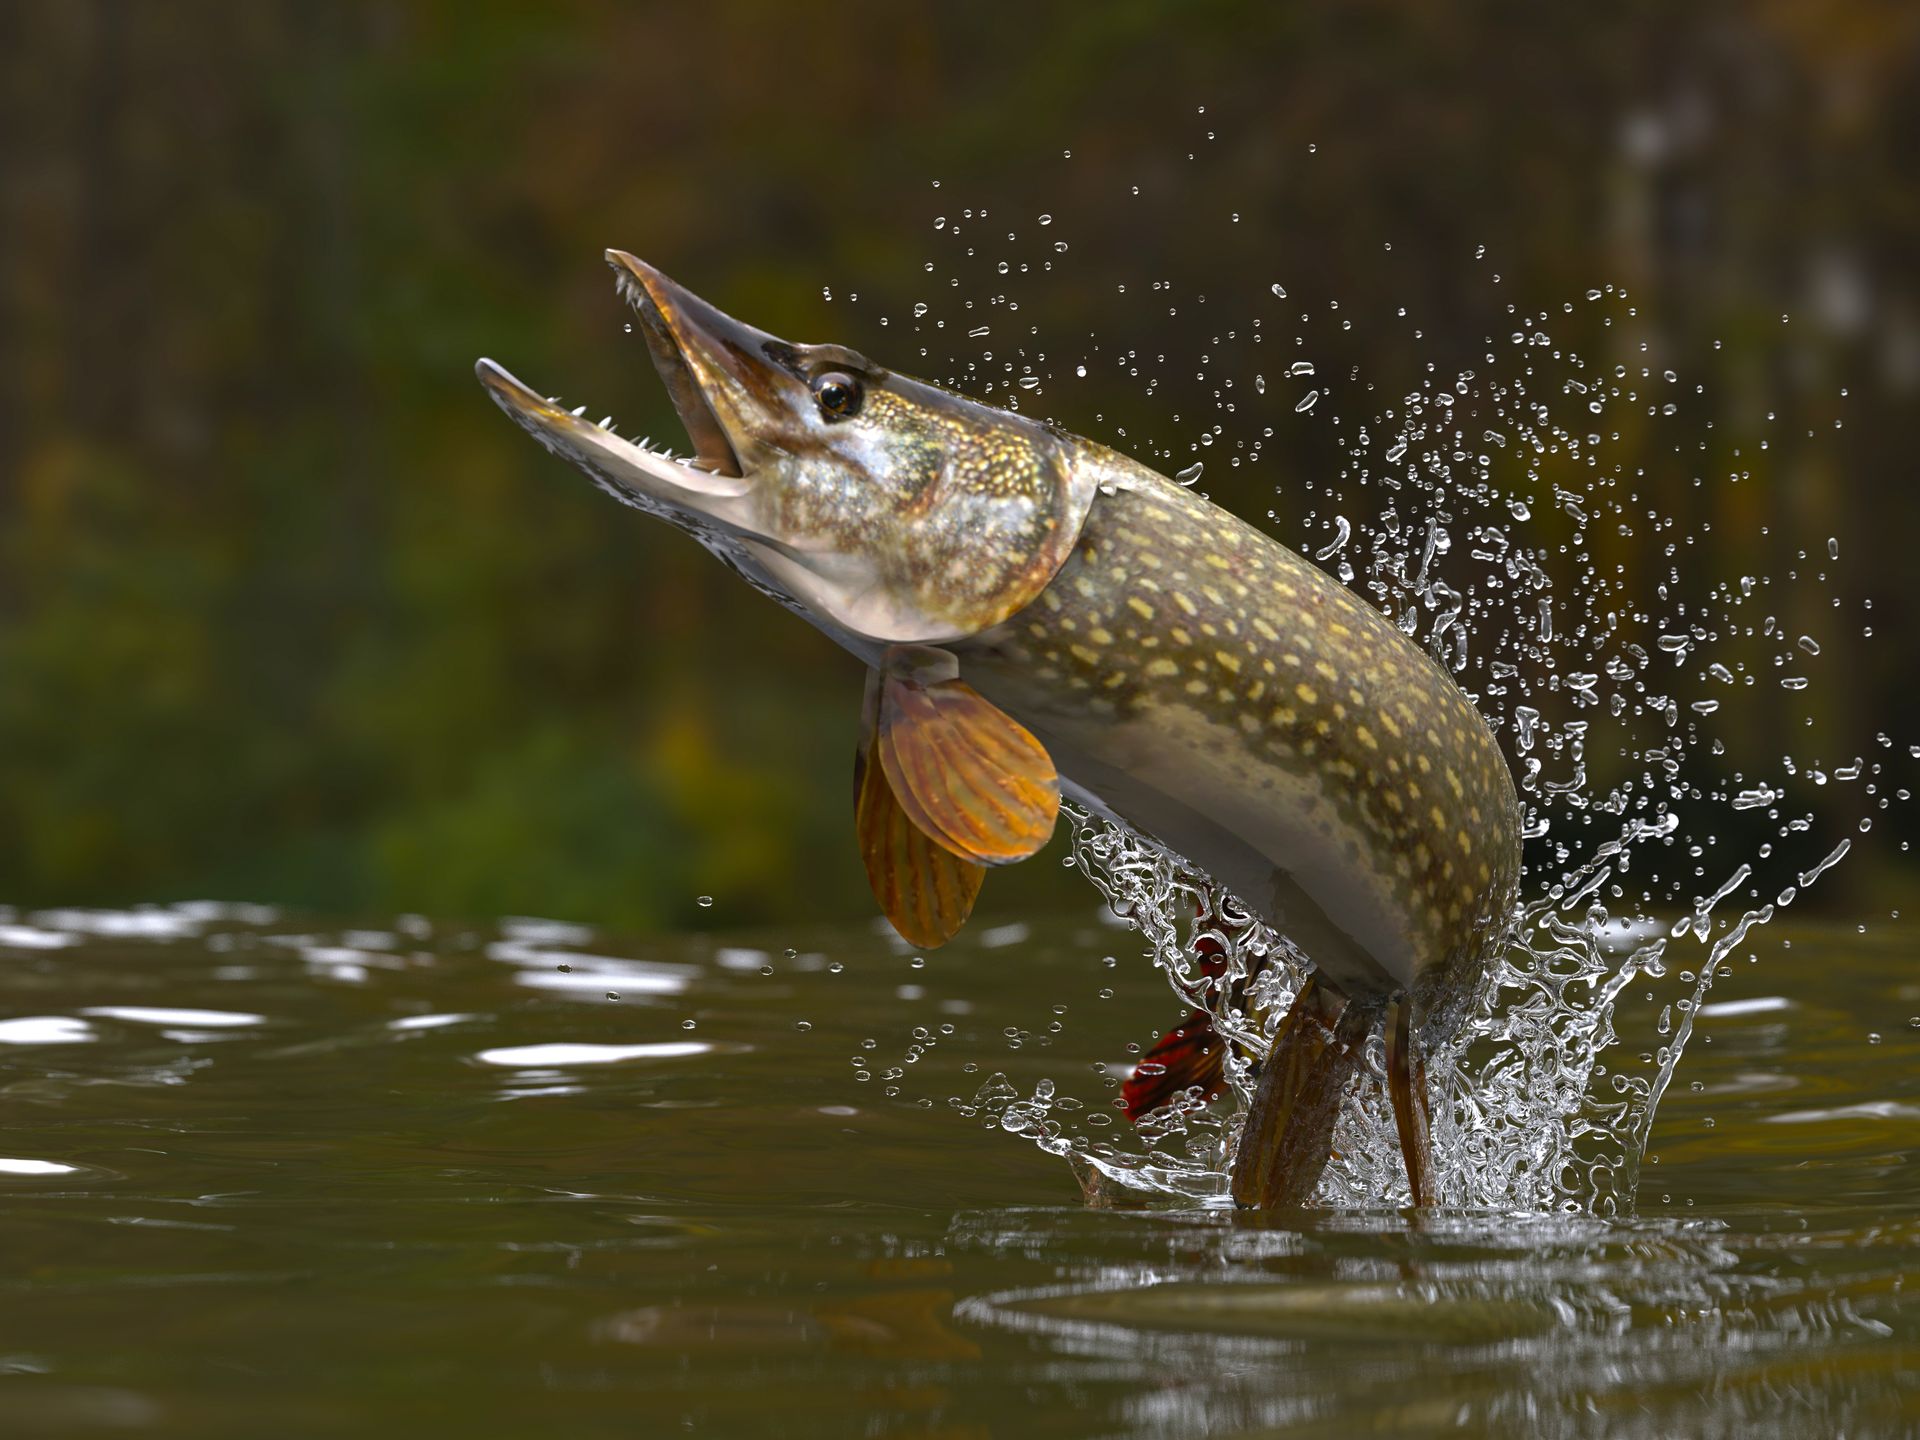 a pike is jumping out of the water with its mouth open .